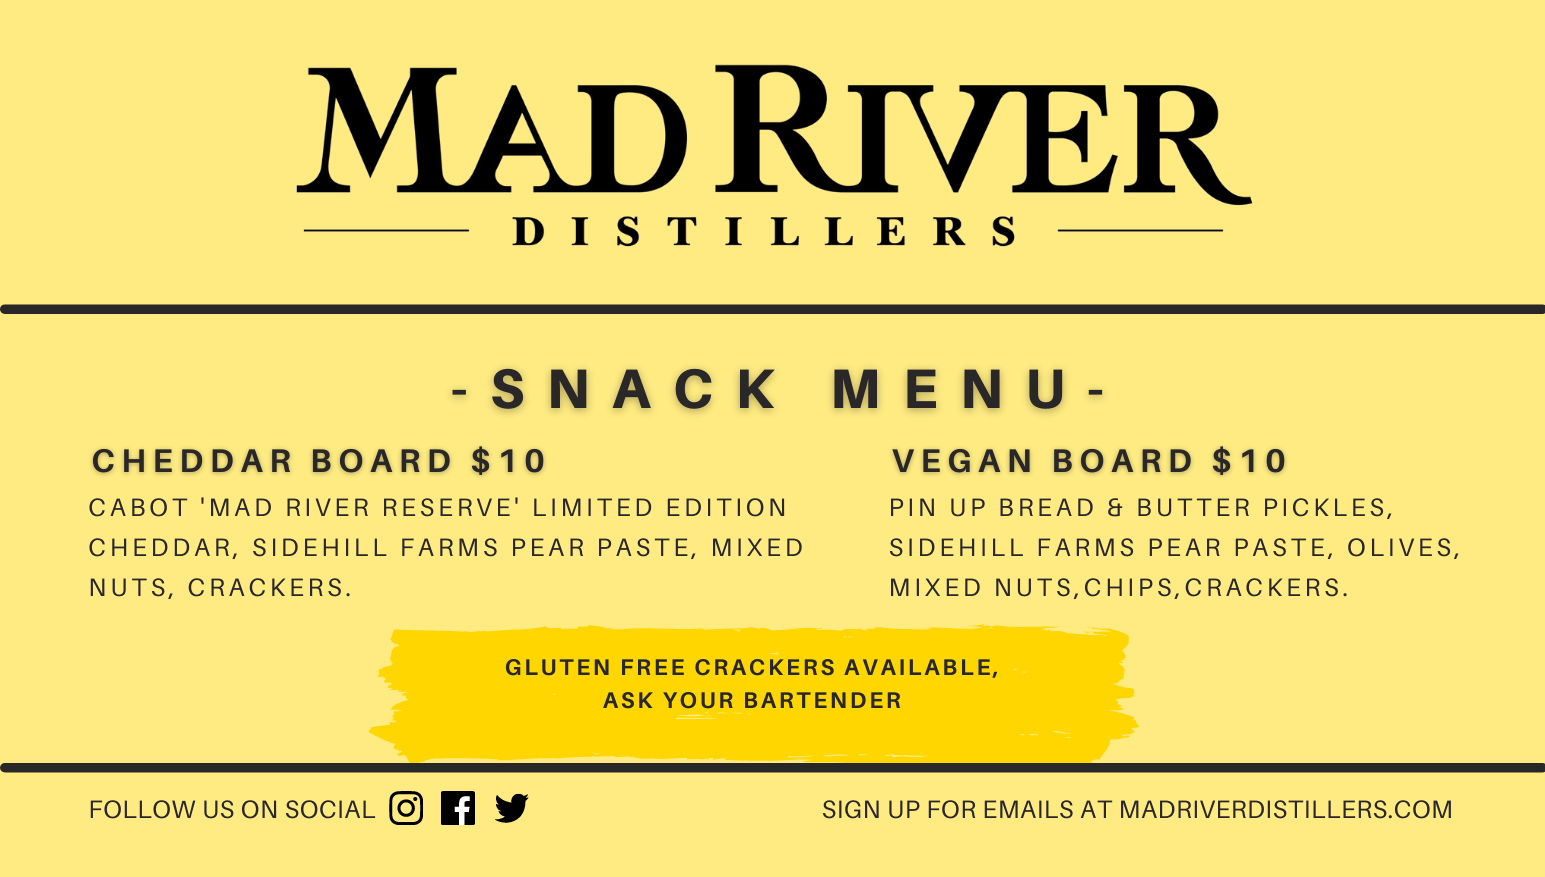 Snack Menu: Cheddar Board with Cabot "Mad River Reserve" Limited Edition Cheddar, Sidehill Farms Pear Paste, Crackers and Mixed Nuts for $10. Vegan Board with Crackers, Sidehill Farms Pear Paste, Olives, Mixed Nuts, Pin up Bread & Butter Pickles and Chips for $10. Gluten free crackers are available, ask your bartender.